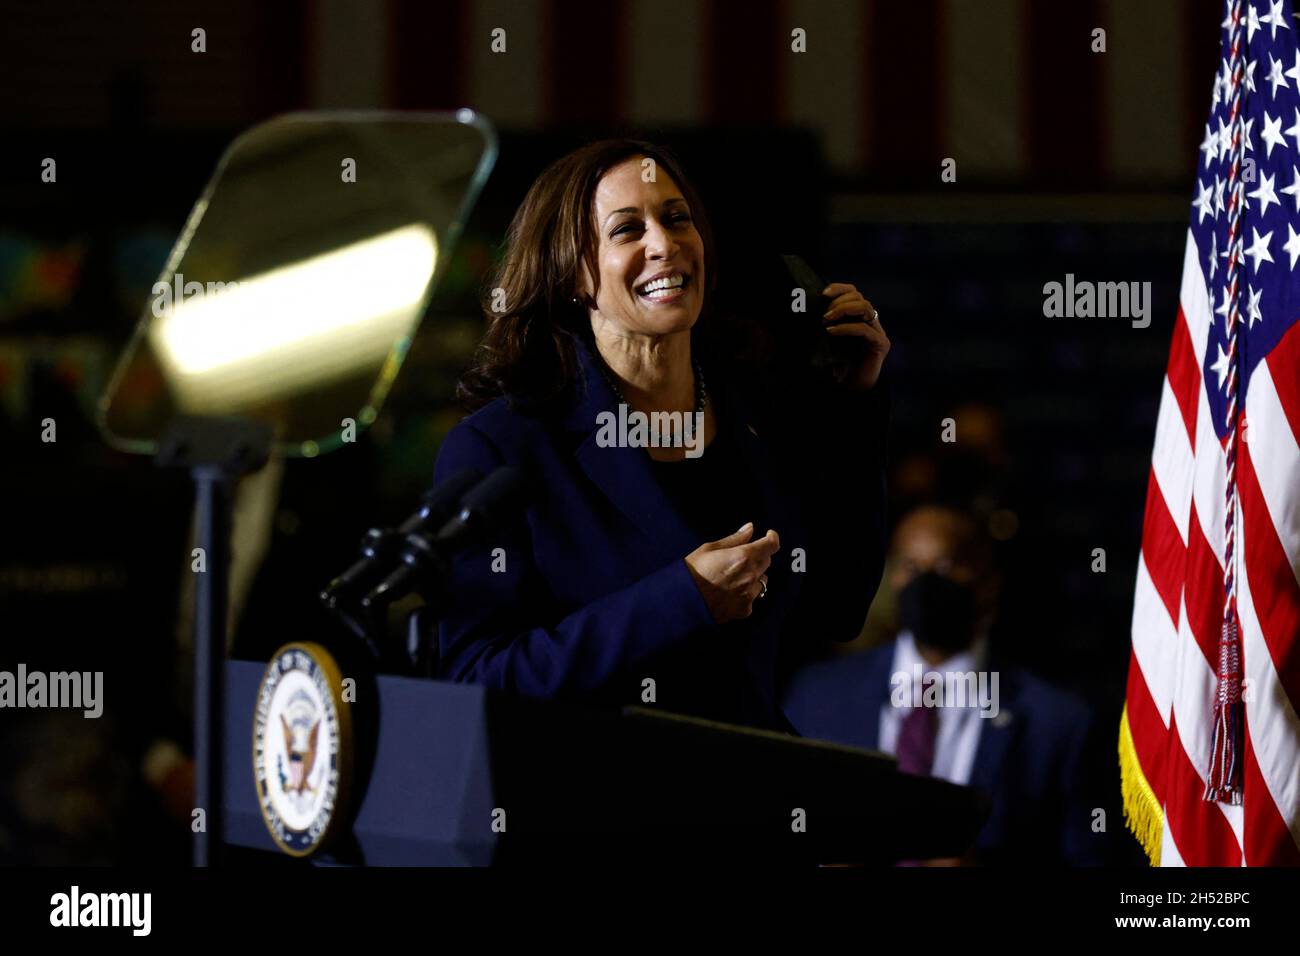 Greenbelt, USA . 05th Nov, 2021. U.S. Vice President Kamala Harris arrives to speak on stage at the National Aeronautics and Space Administration (NASA) Goddard Space Flight Center in Greenbelt, MD, USA on Friday November 5, 2021. Harris announced the Biden administration's inaugural meeting of the National Space Council will be held on December 1. Photo by Ting Shen/Pool/ABACAPRESS.COM Credit: Abaca Press/Alamy Live News Stock Photo